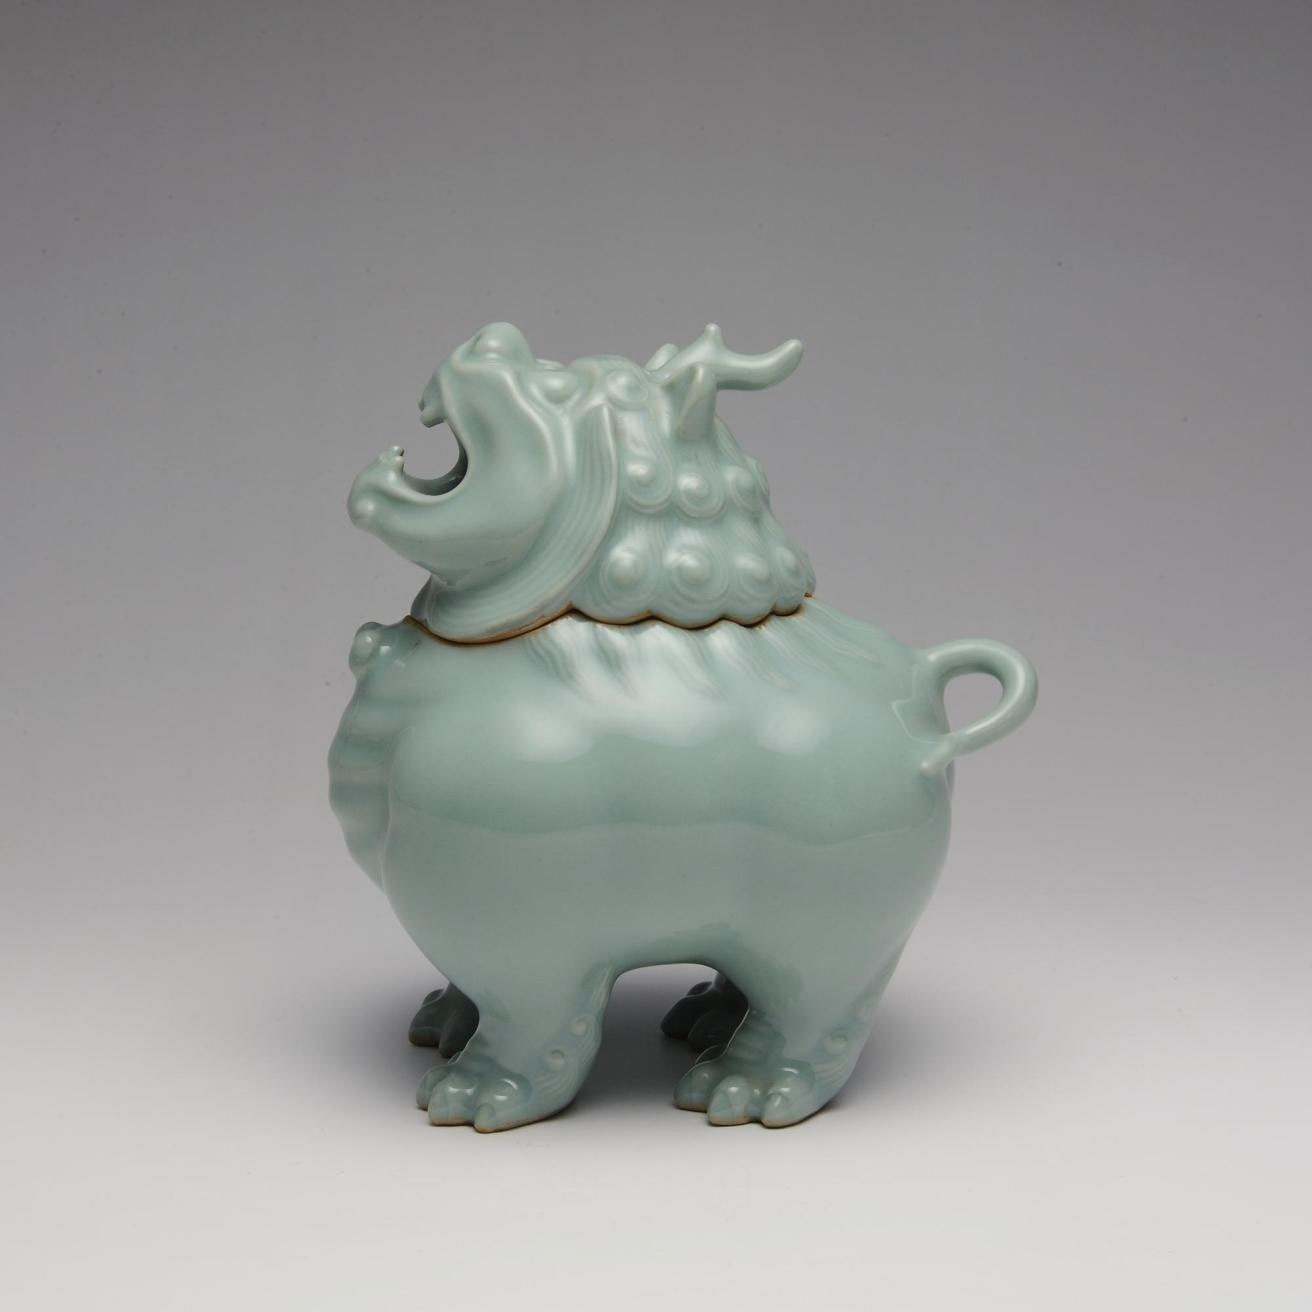 Incense burner of stoneware with celadon glaze in the form of a lion-dog, in two parts: Japan, by Suwa Sozan II, 1922-77.